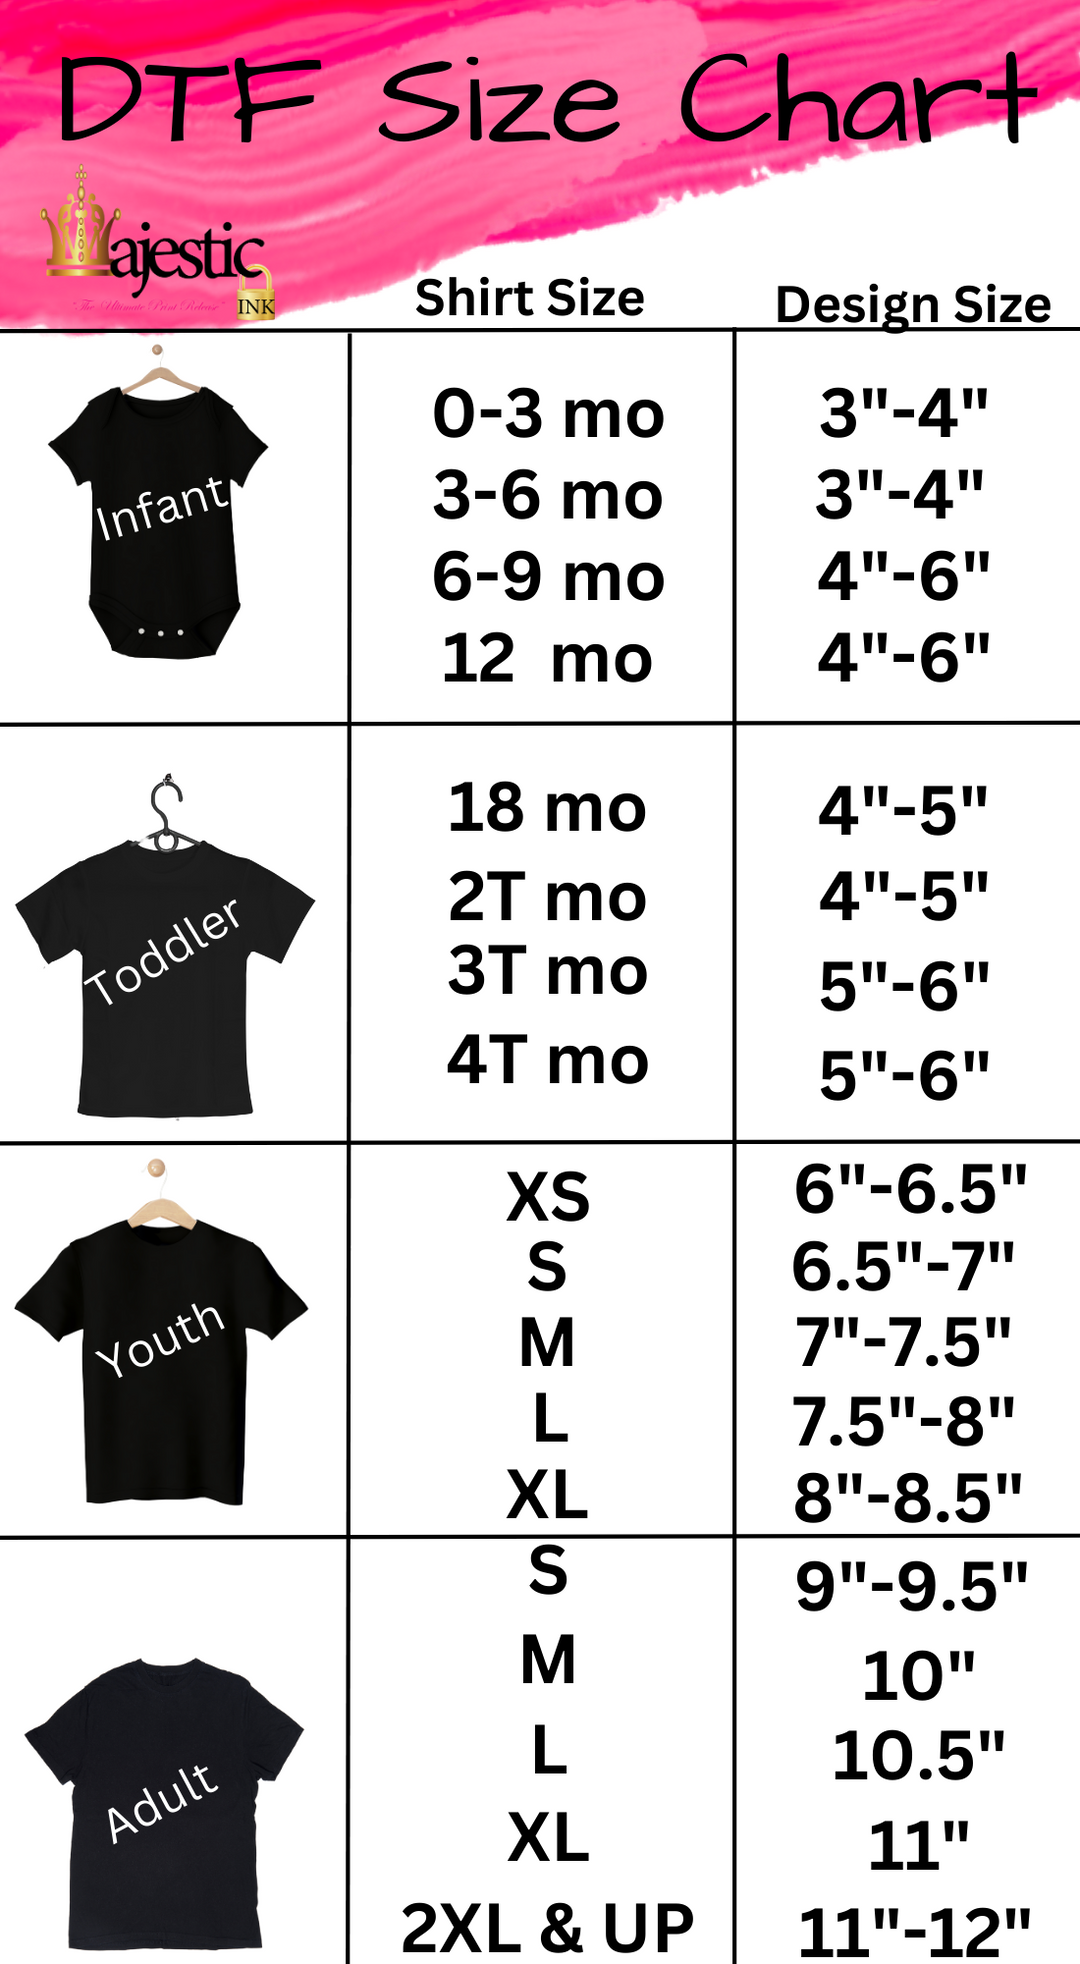 DTF SIZE CHART Majestic INK™